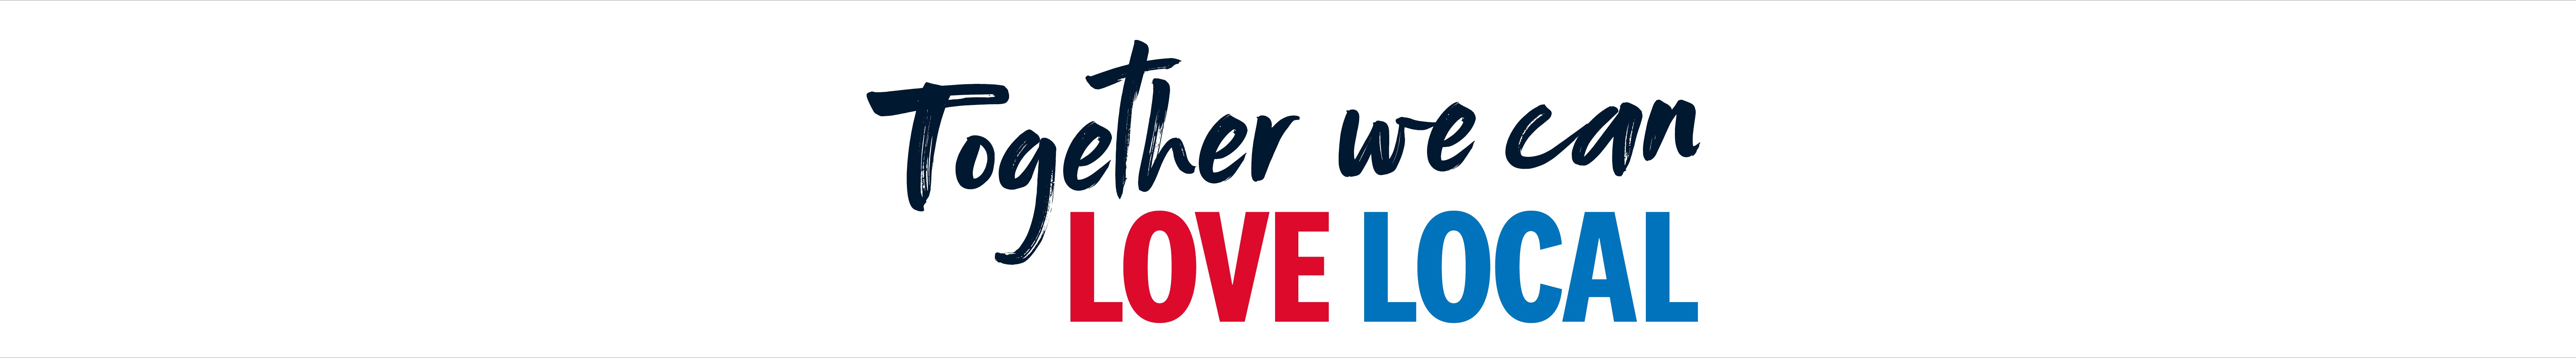 White banner with the words 'Together we can love local' in black, red, and blue.